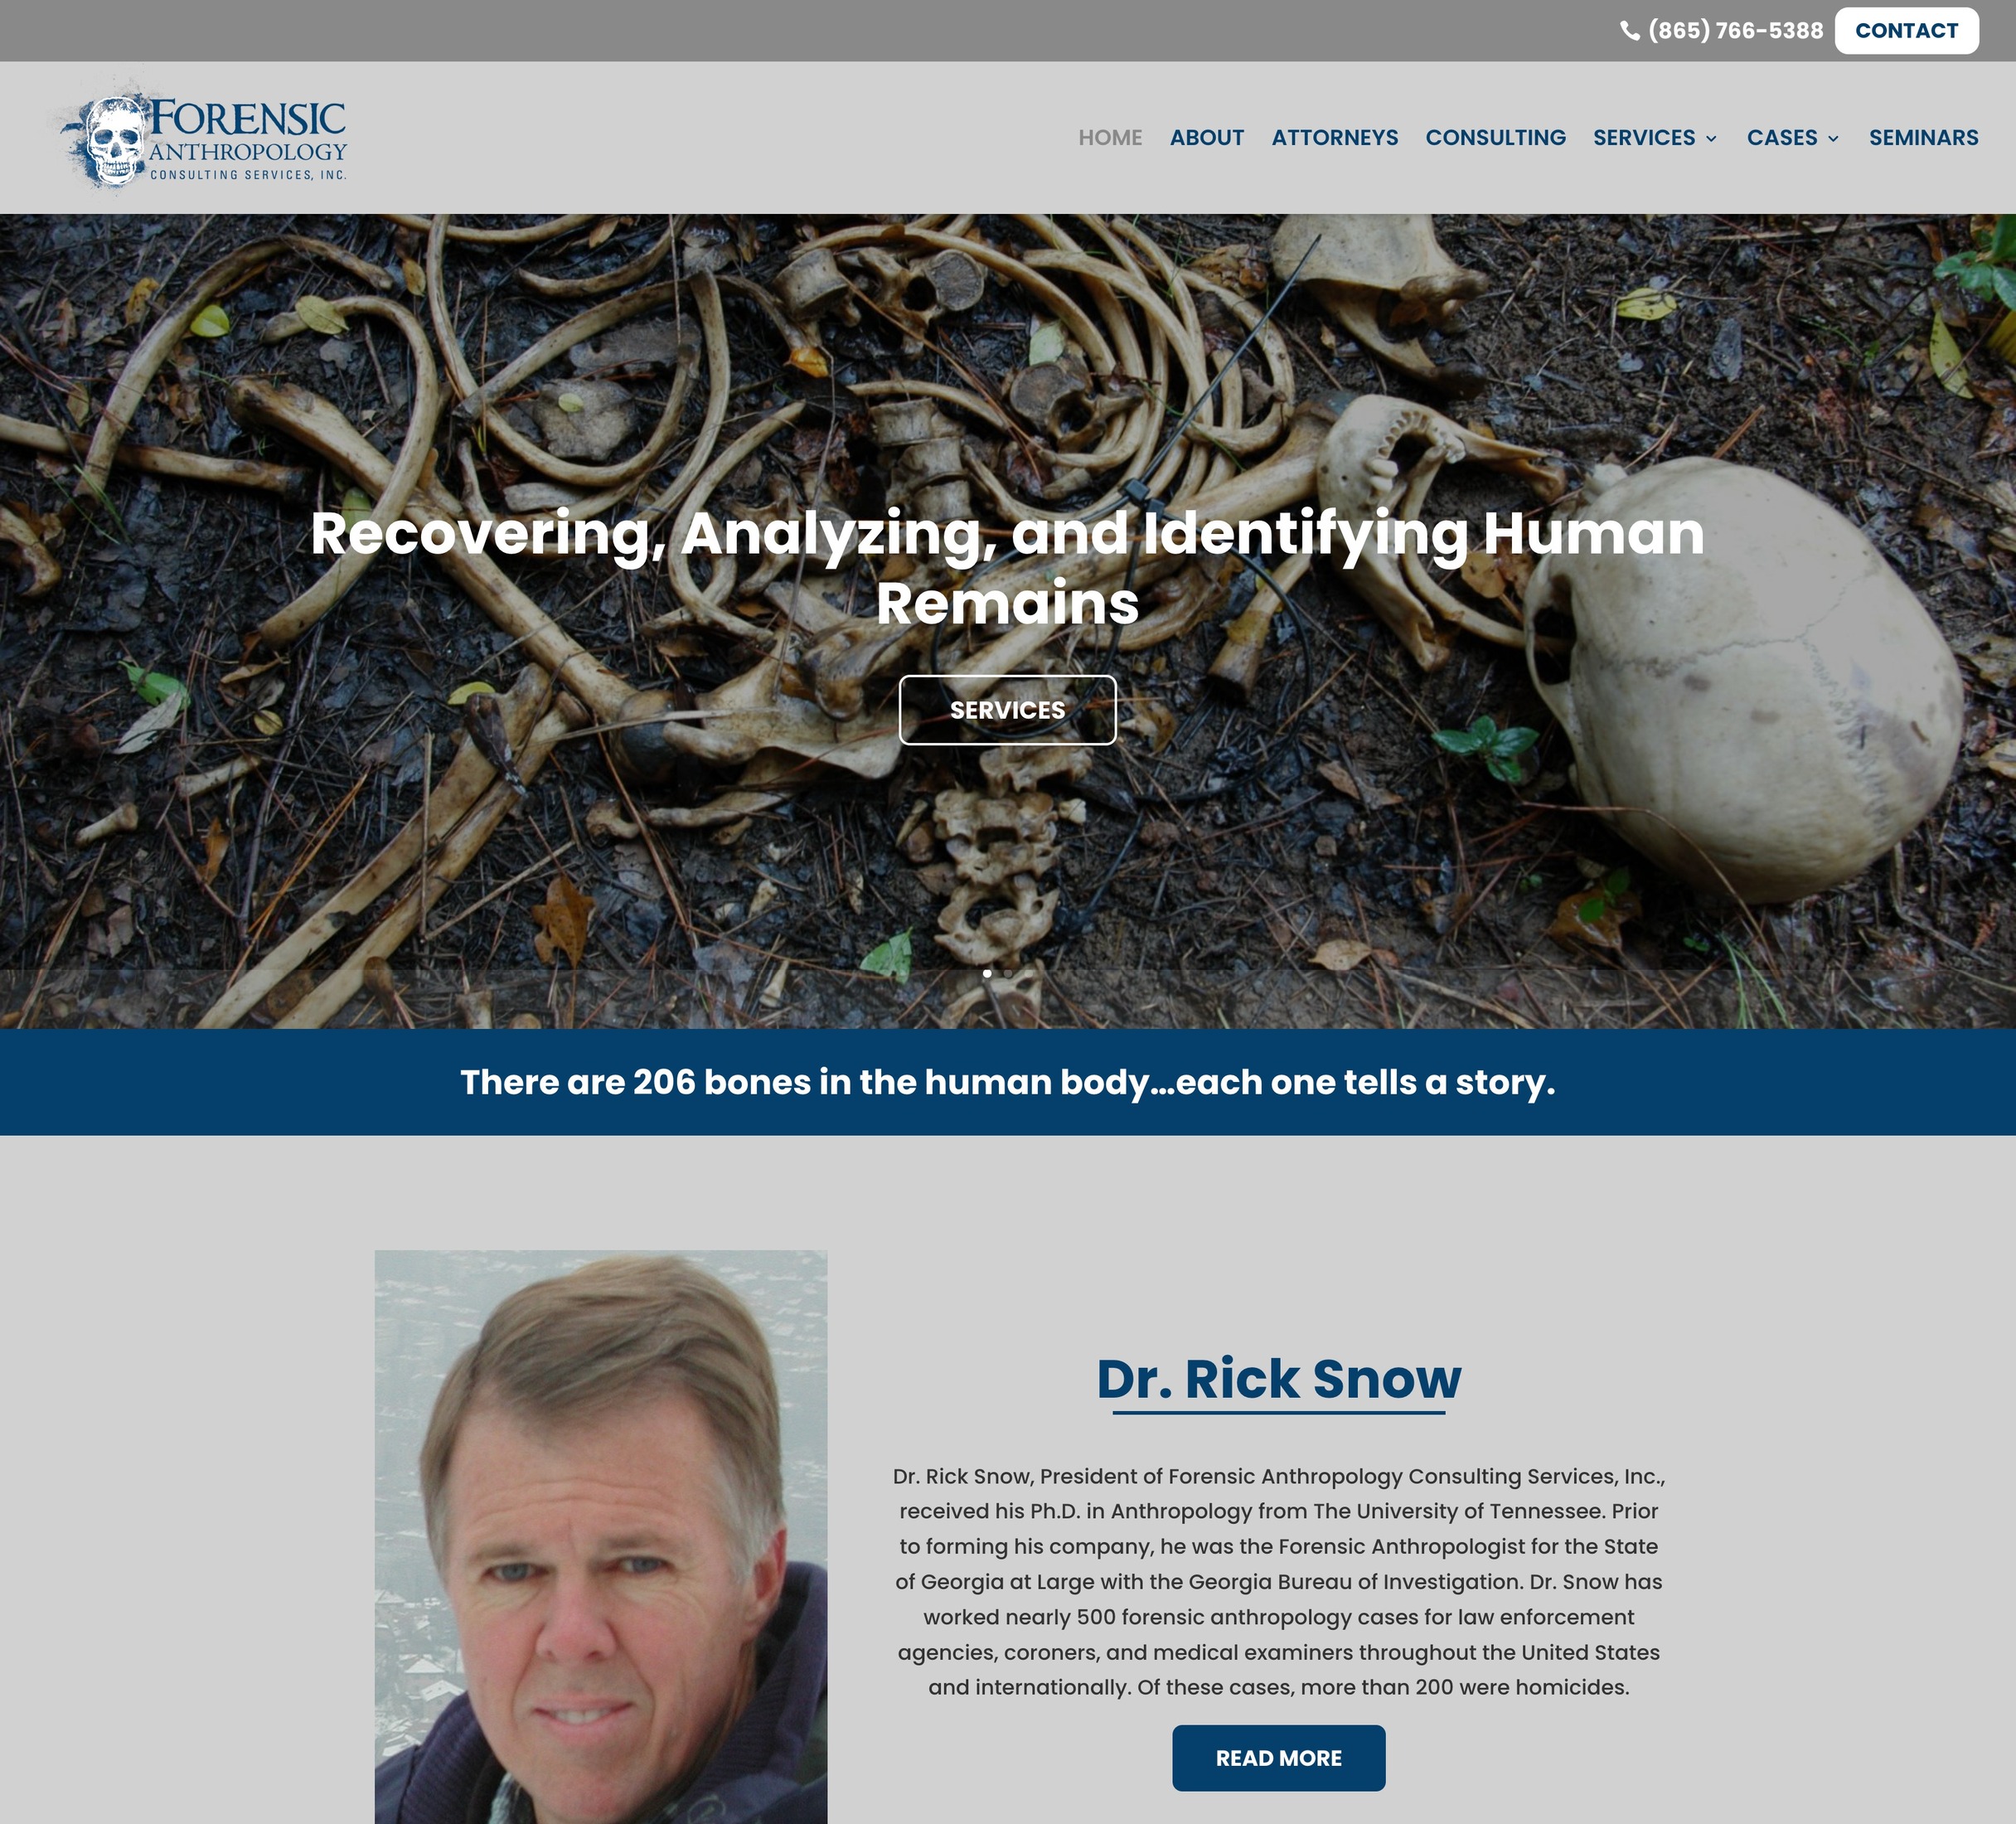 Forensic Anthropology Consulting Services, Inc.